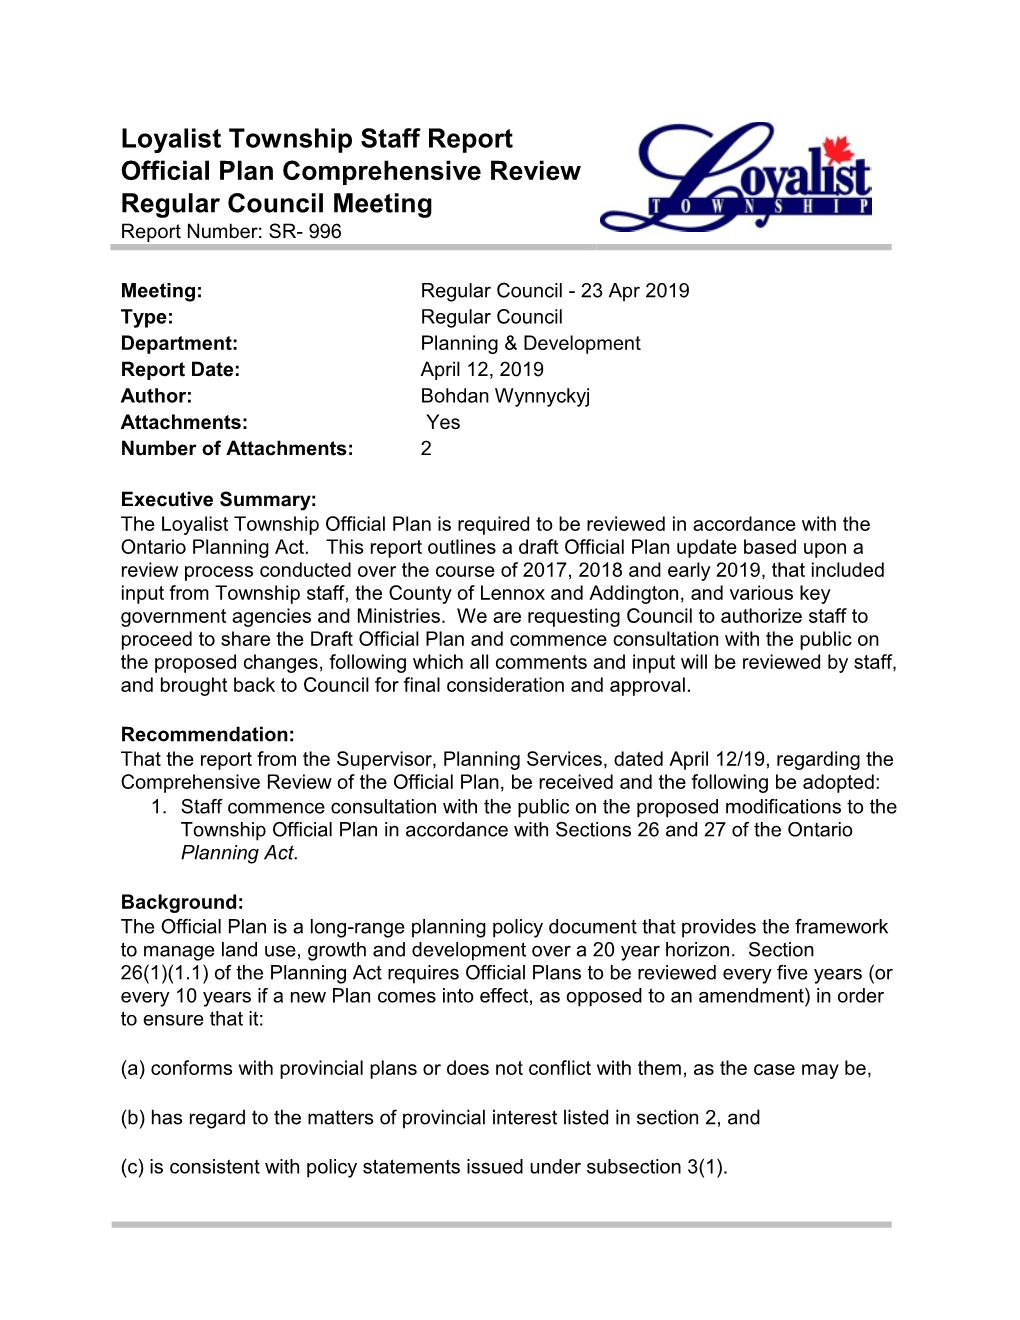 Loyalist Township Staff Report Official Plan Comprehensive Review Regular Council Meeting Report Number: SR- 996